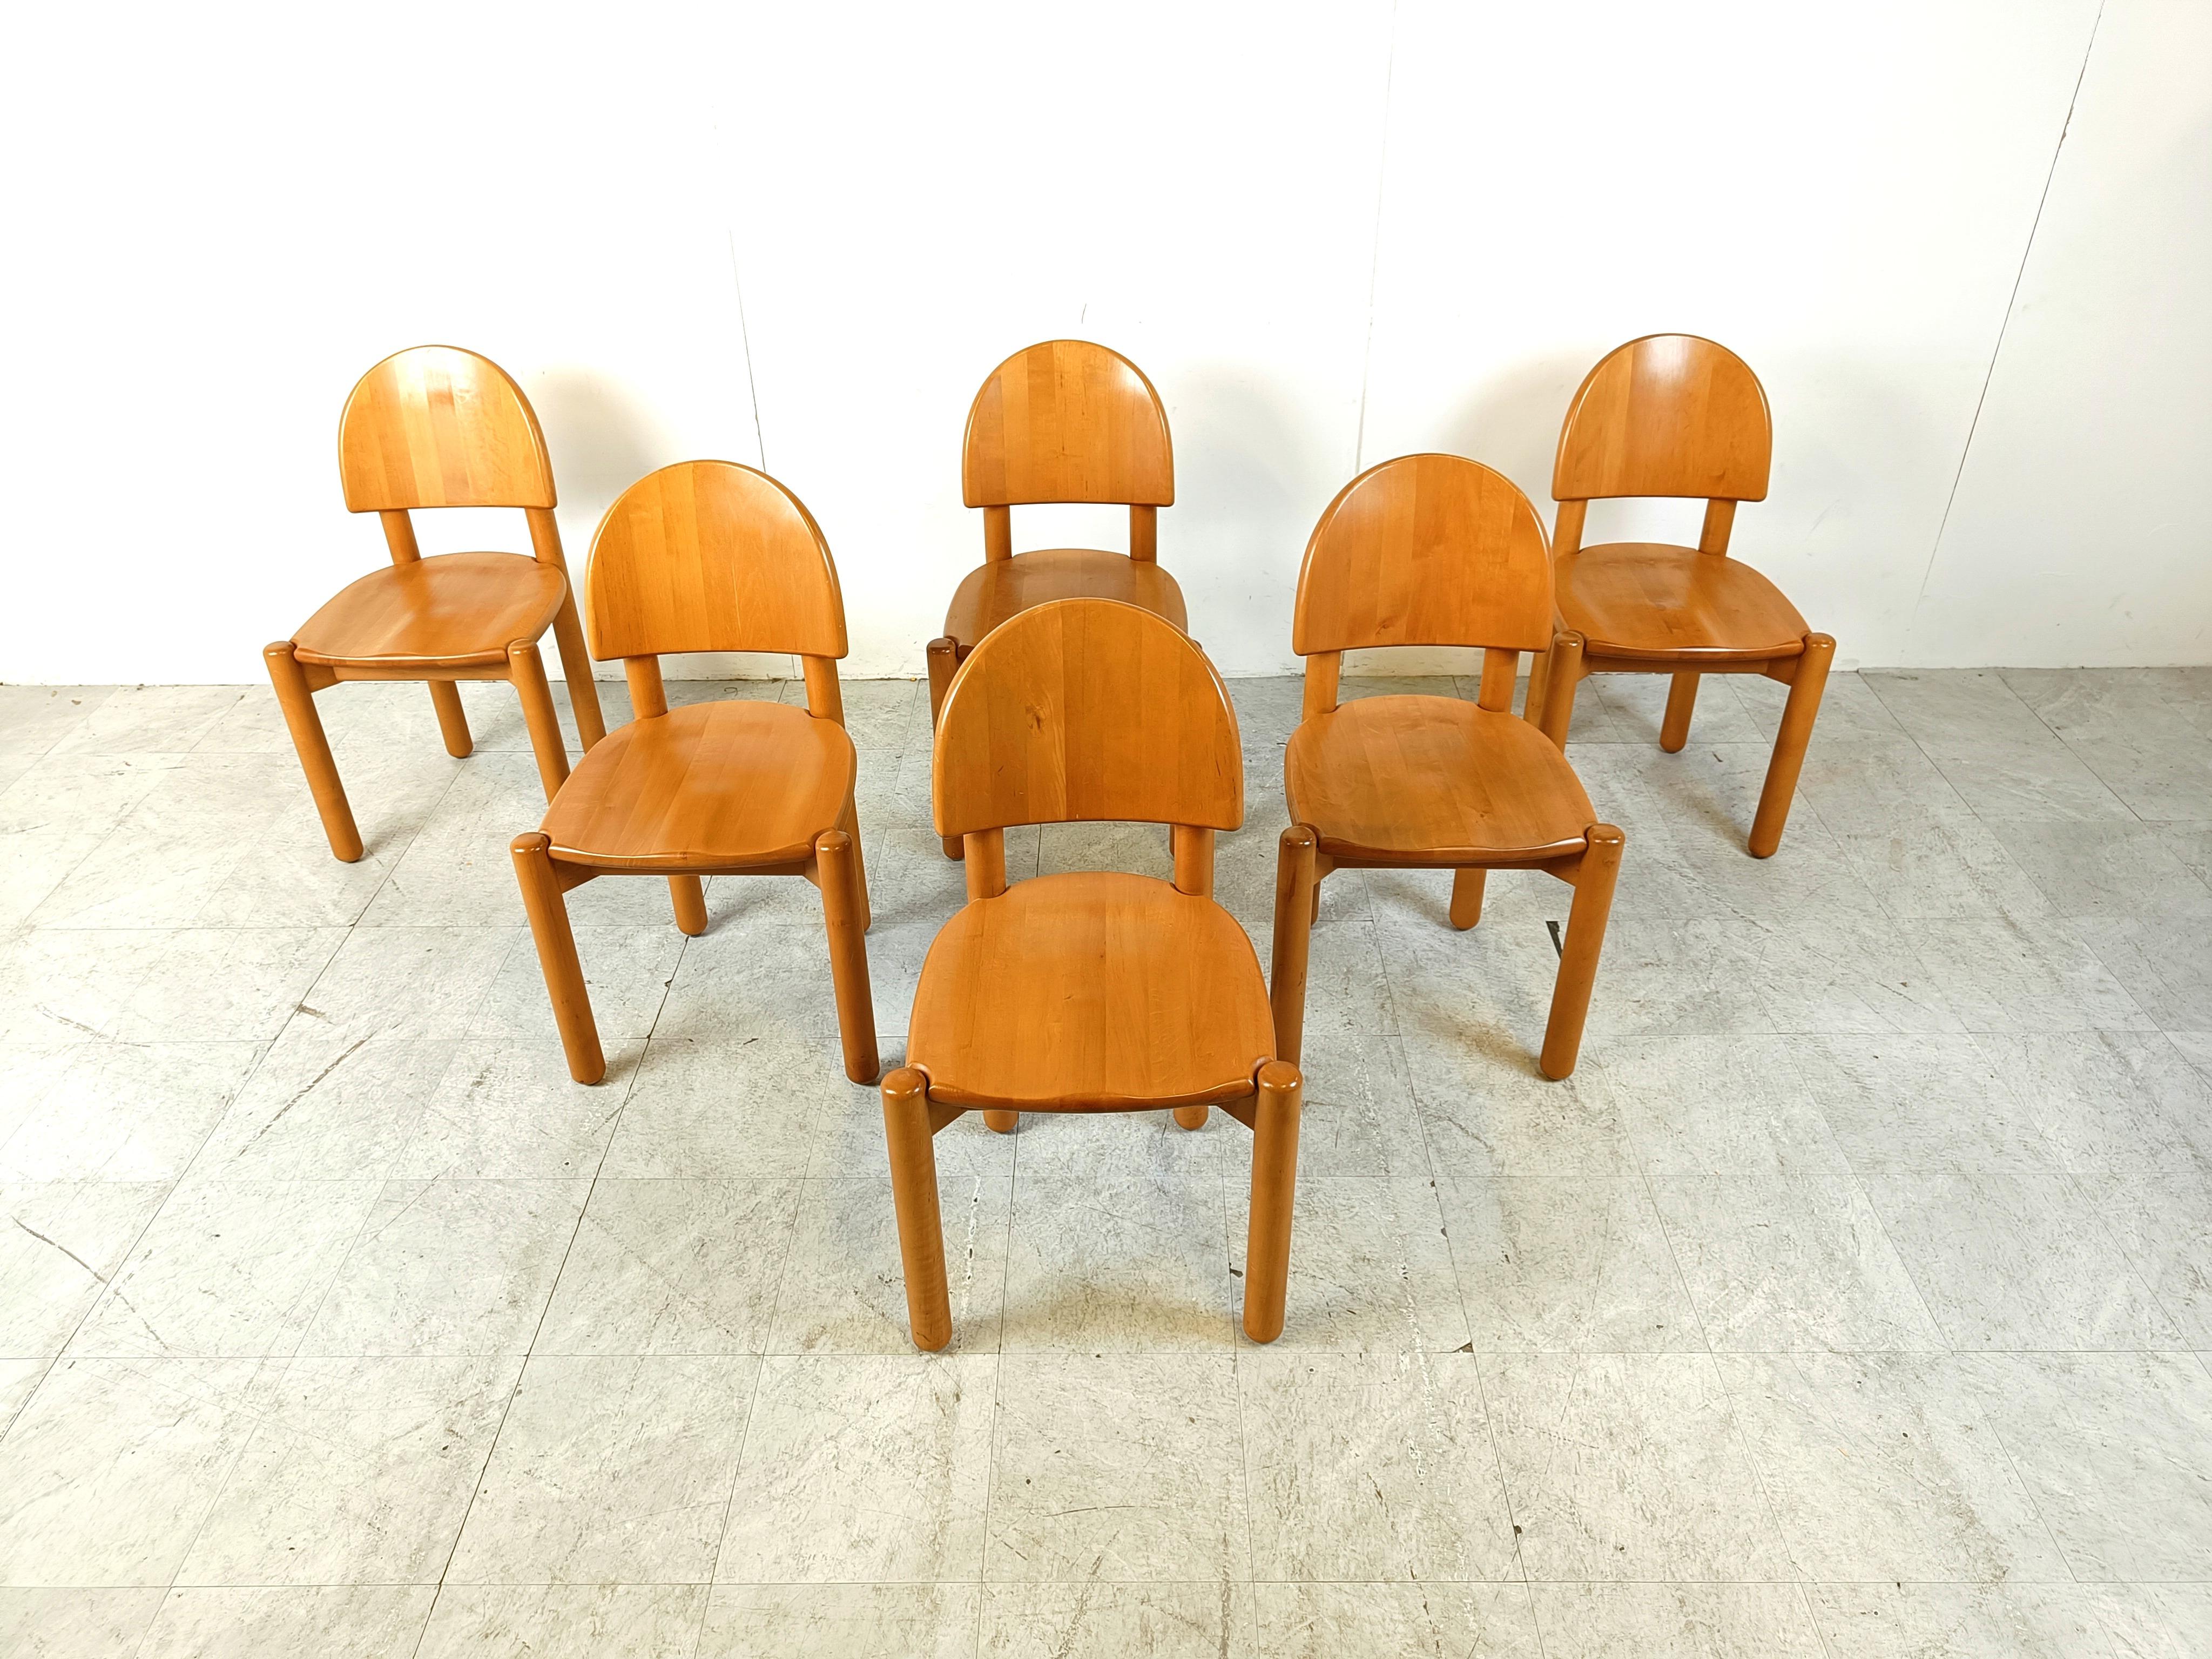 Set of 6 scandinavian solid pine wood dining chairs by Rainer Daumilier for  Hirtshals Savvaerk

The chairs are in good condition.

Nicely shaped armrests and seats.

Beautiful timeless design.

Good original condition.

1980s - Denmark